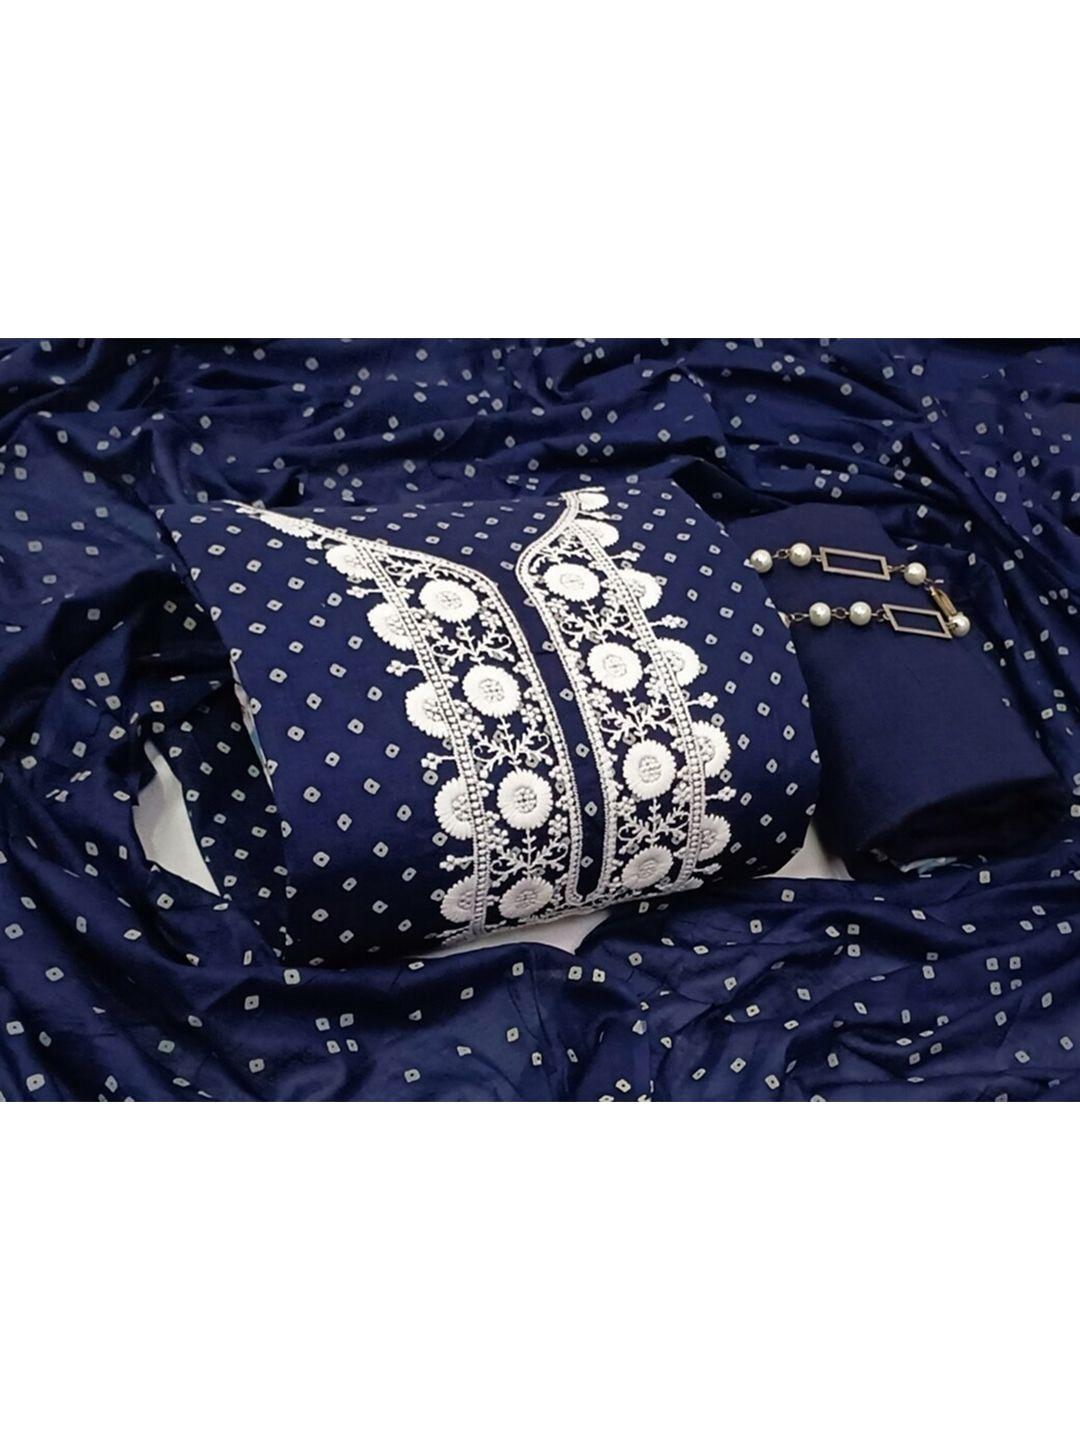 salwar studio navy blue & white embroidered pure cotton unstitched dress material